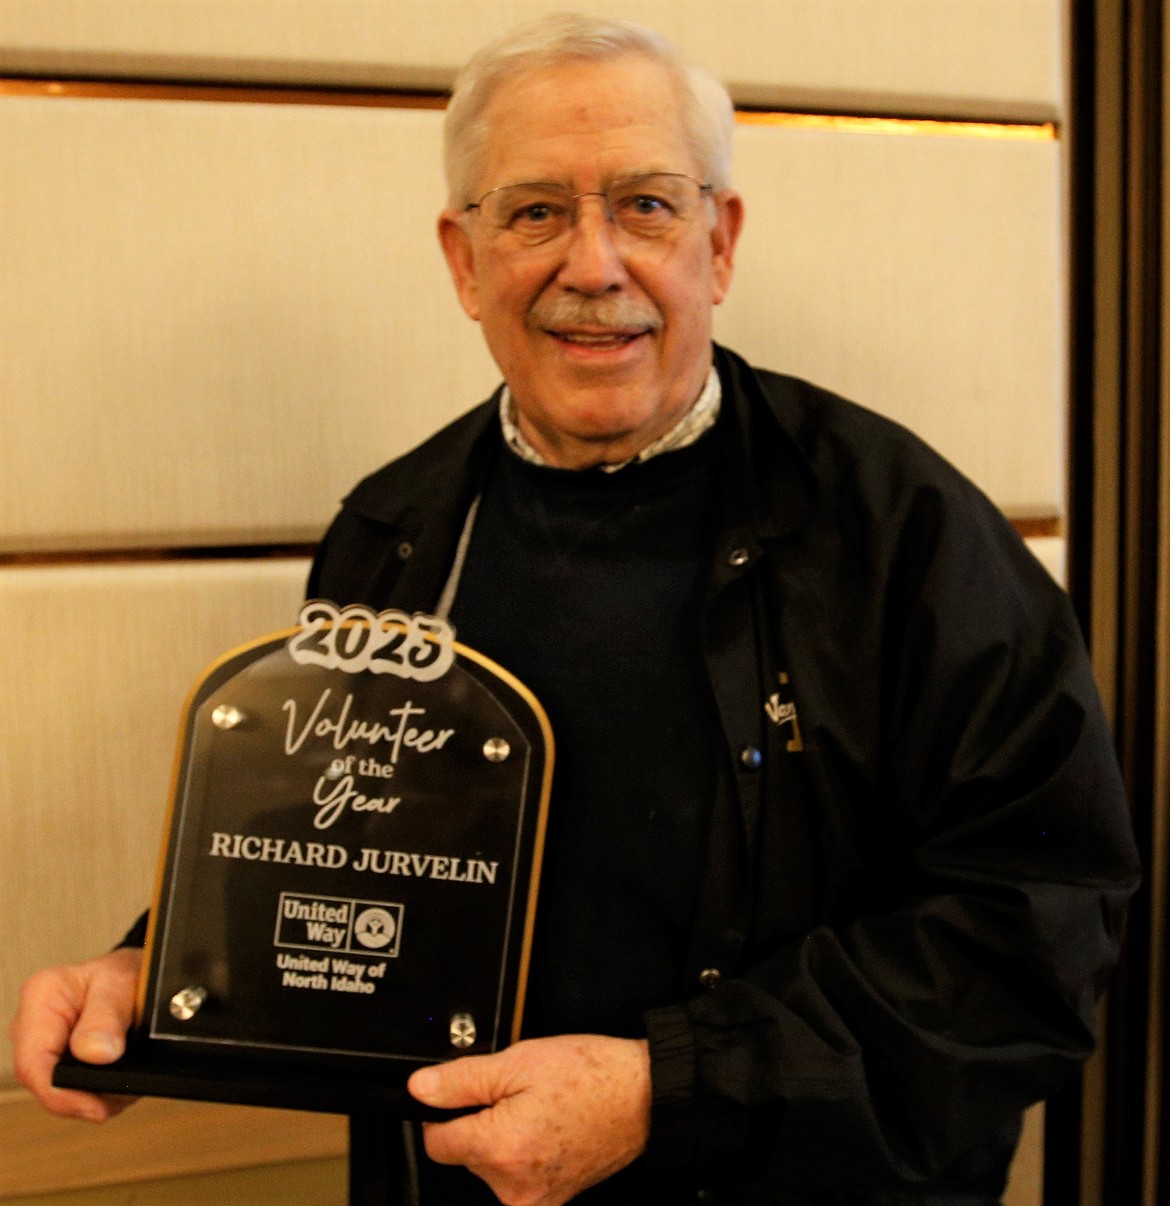 Richard Jurvelin holds the Volunteer of the Year award he received from United Way of North Idaho at The Coeur d'Alene Resort on Wednesday.